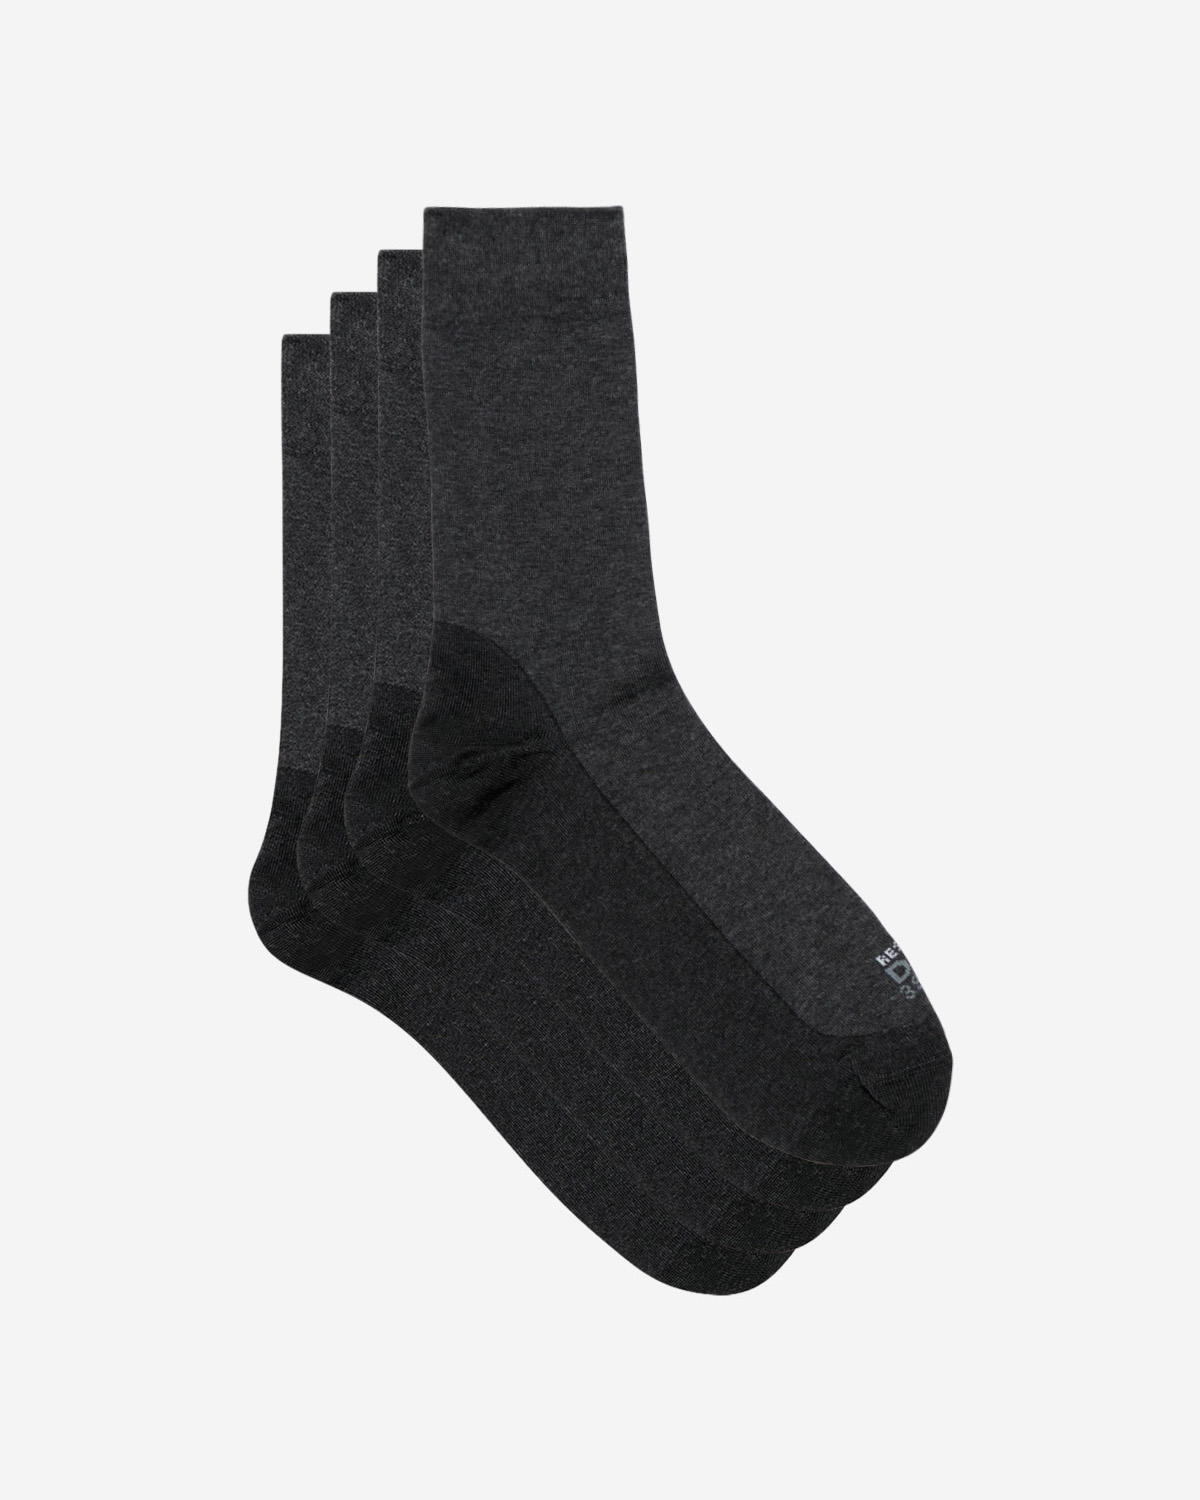 Pack of 2 pairs of men's socks Anthracite Heather Ultra Resist